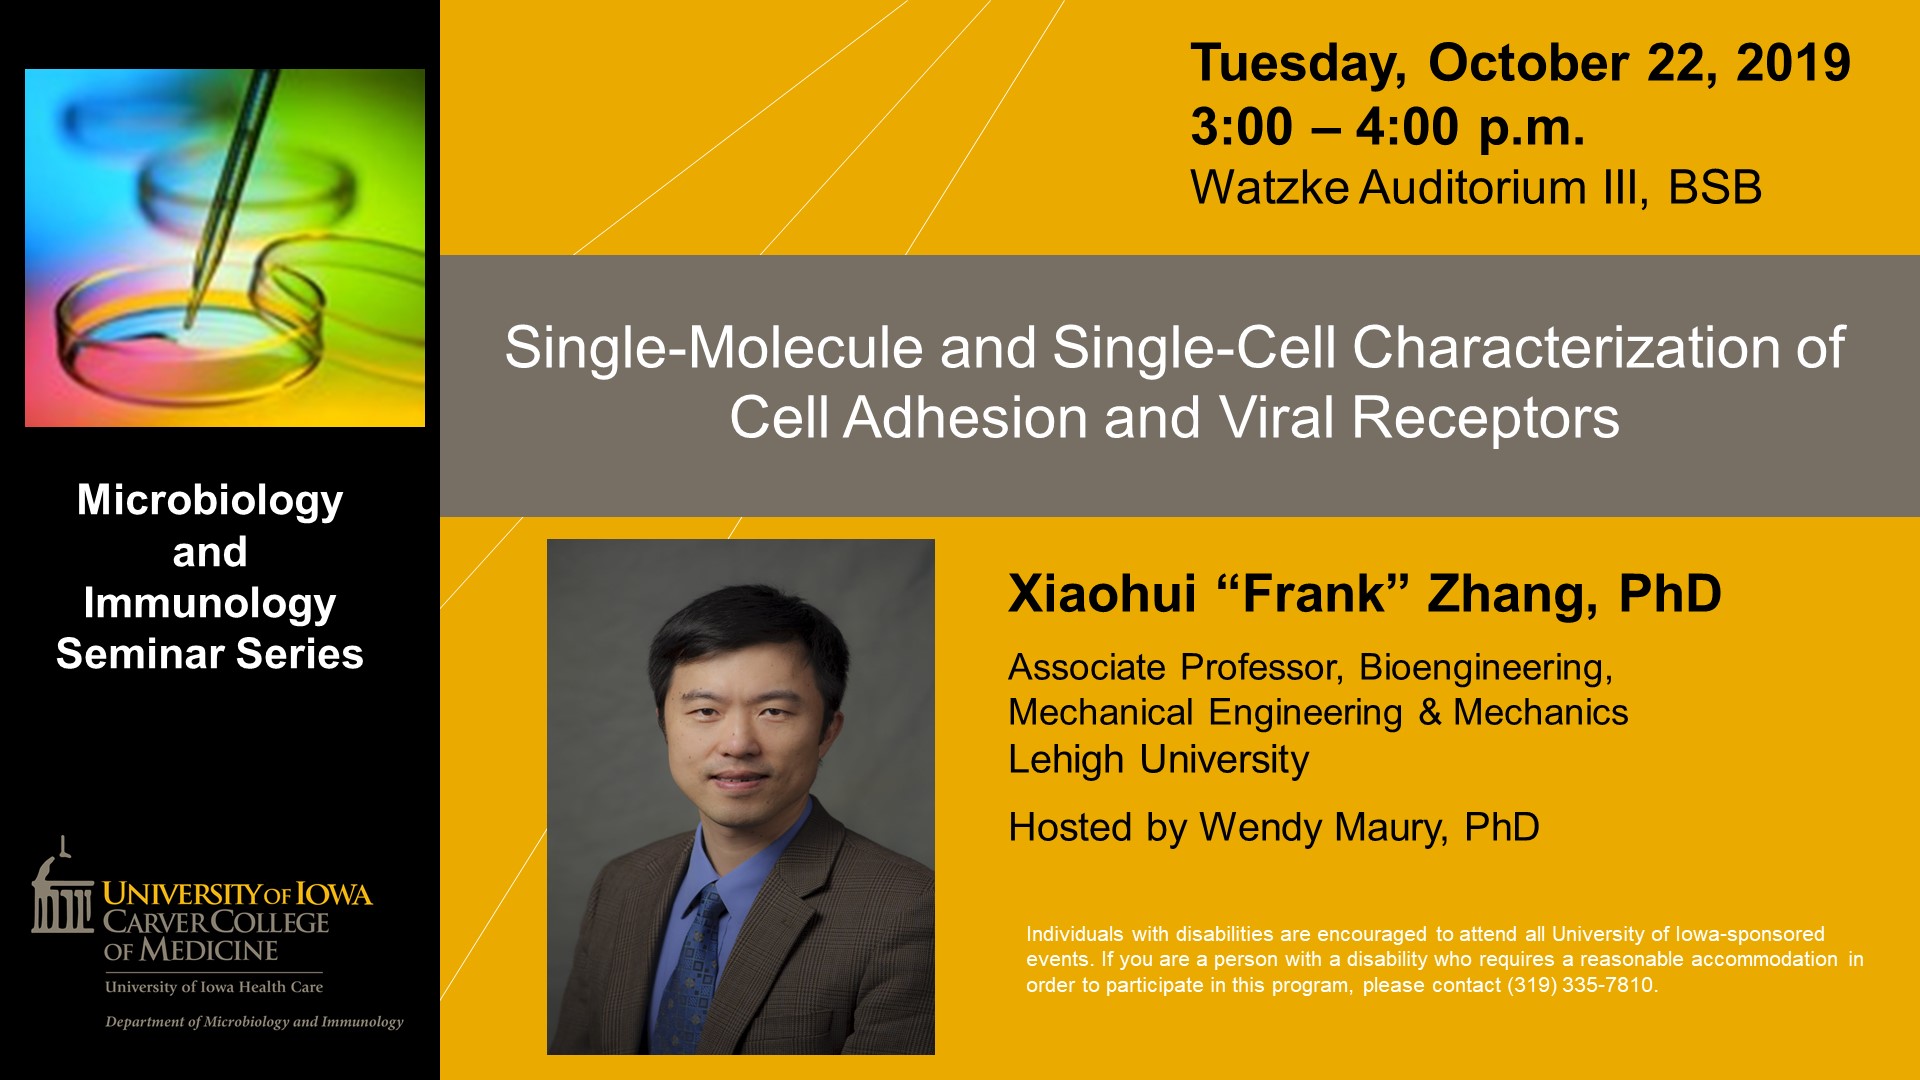 Microbiology and Immunology Seminar: Dr. Xiaohui (Frank) Zhang, PhD promotional image